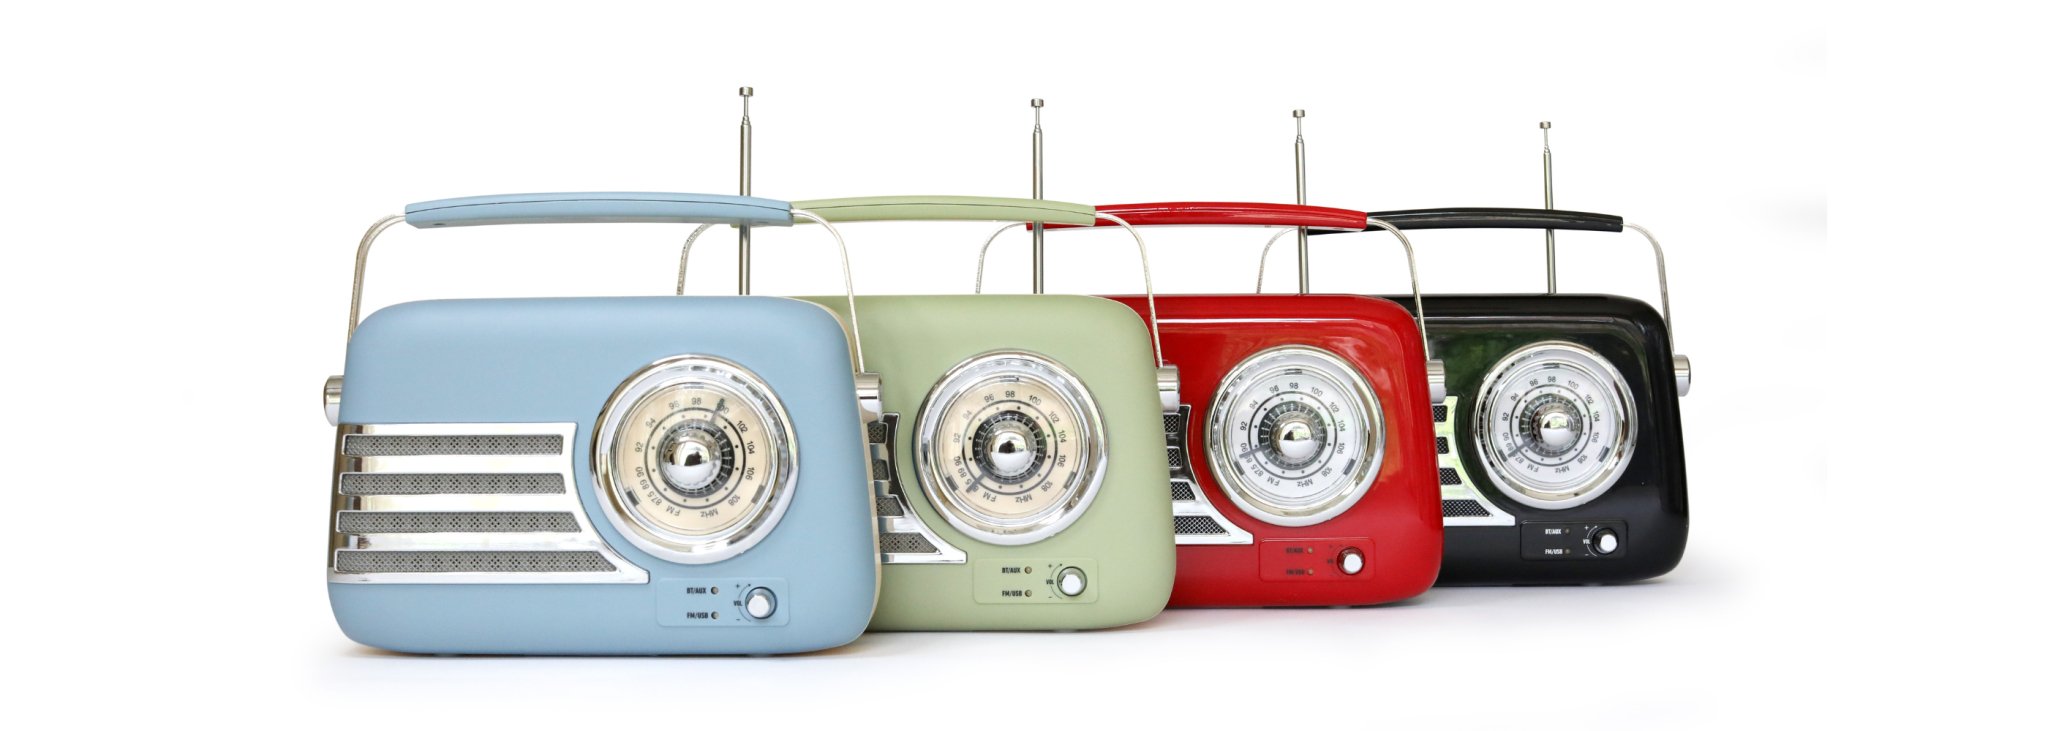 UK Technology Retro Radios lined up in the colours blue green red and black